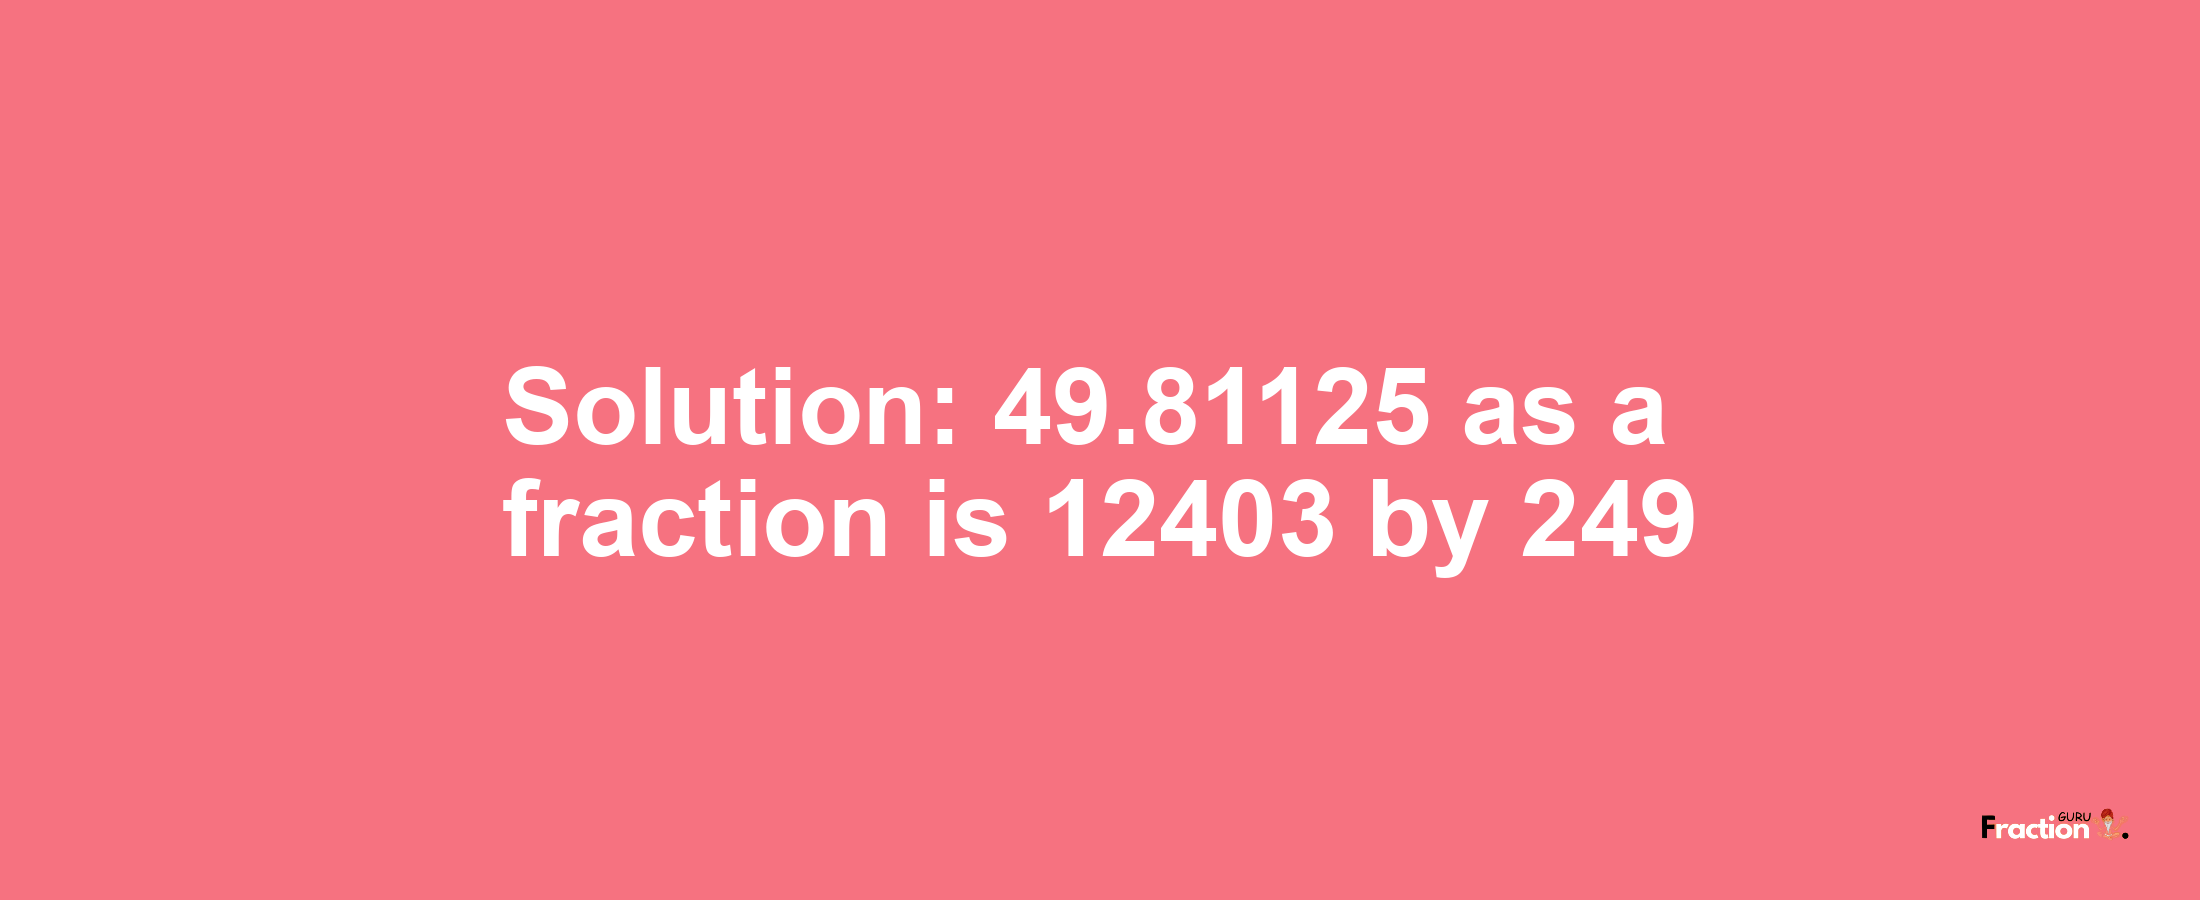 Solution:49.81125 as a fraction is 12403/249